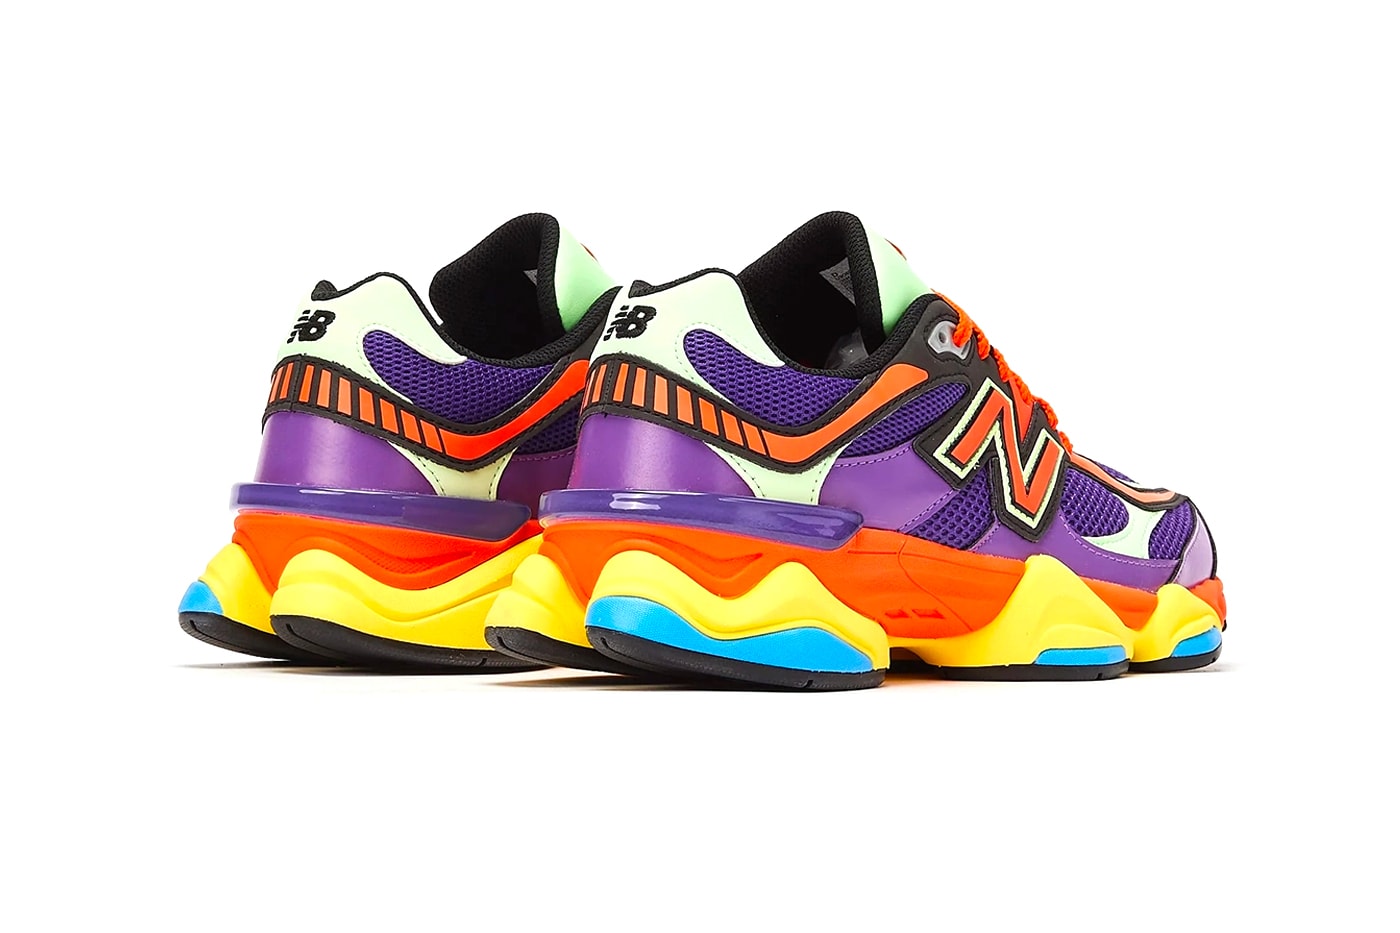 New Balance 9060 Arrives in "Prism Purple" This July U9060NBX july 1st release info summer sneakers shoes multi colored packaging vibrant sneakers colorful